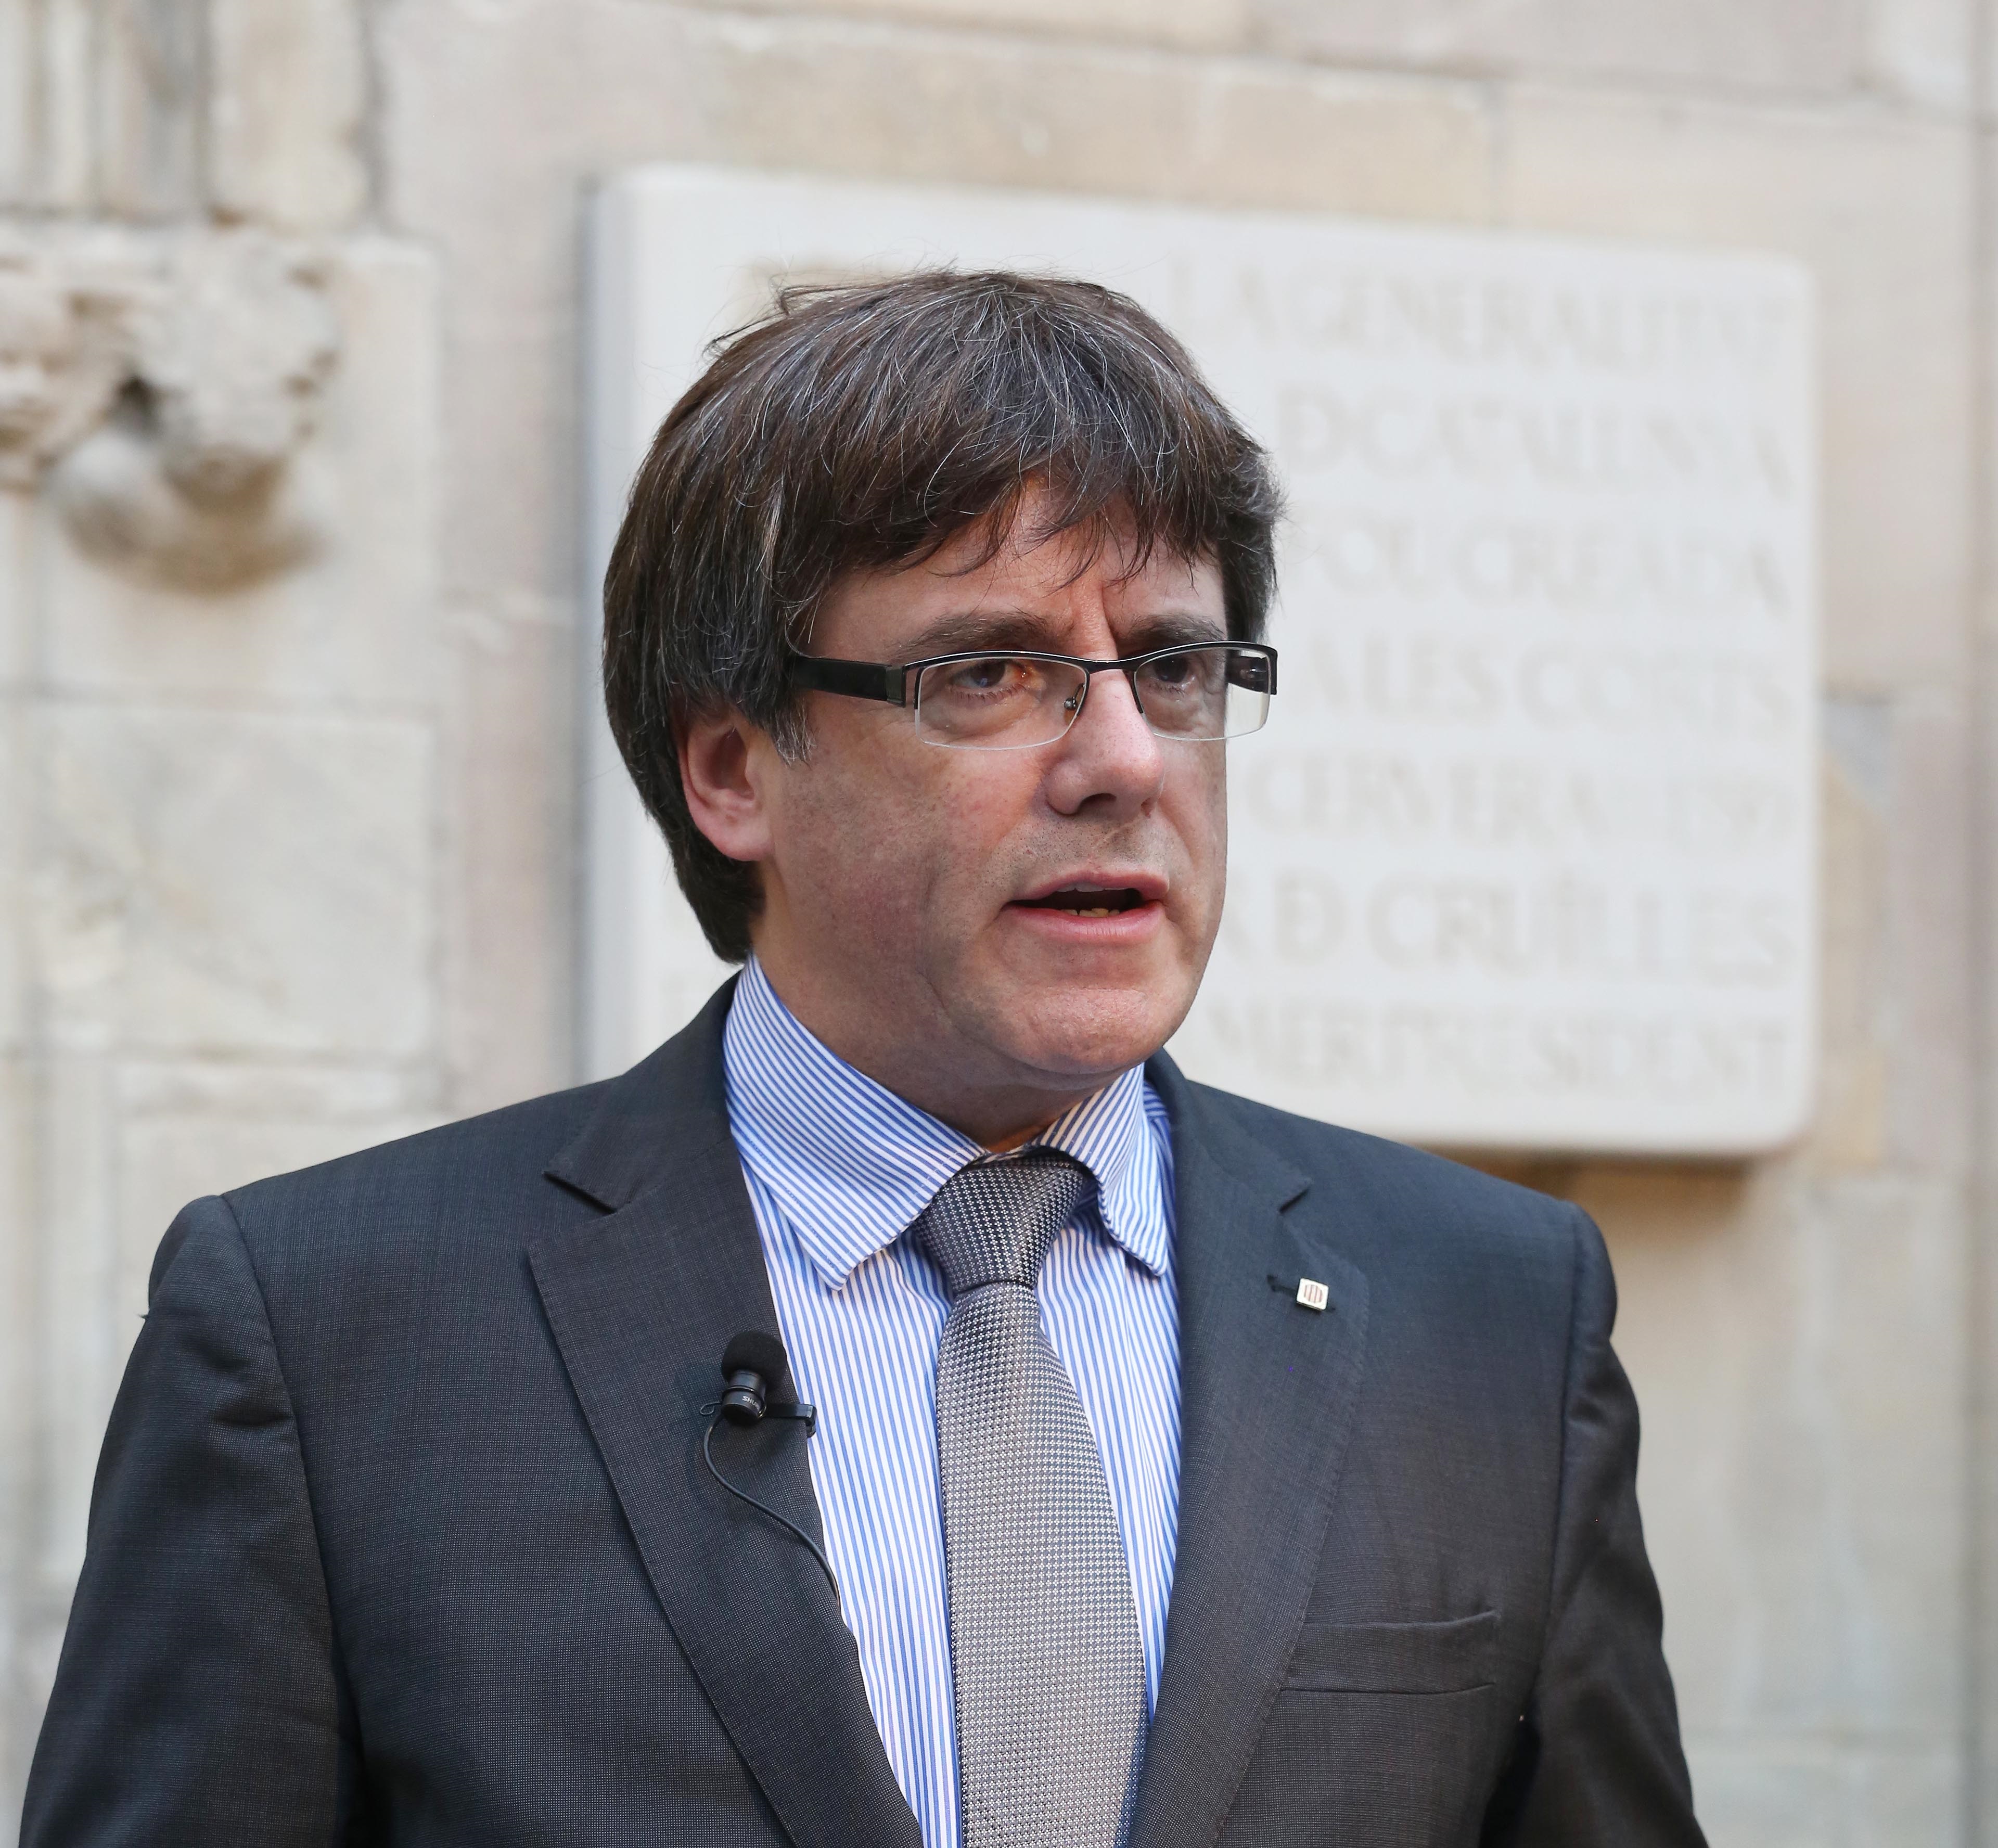 The Catalan president, Carles Puigdemont, during his statement